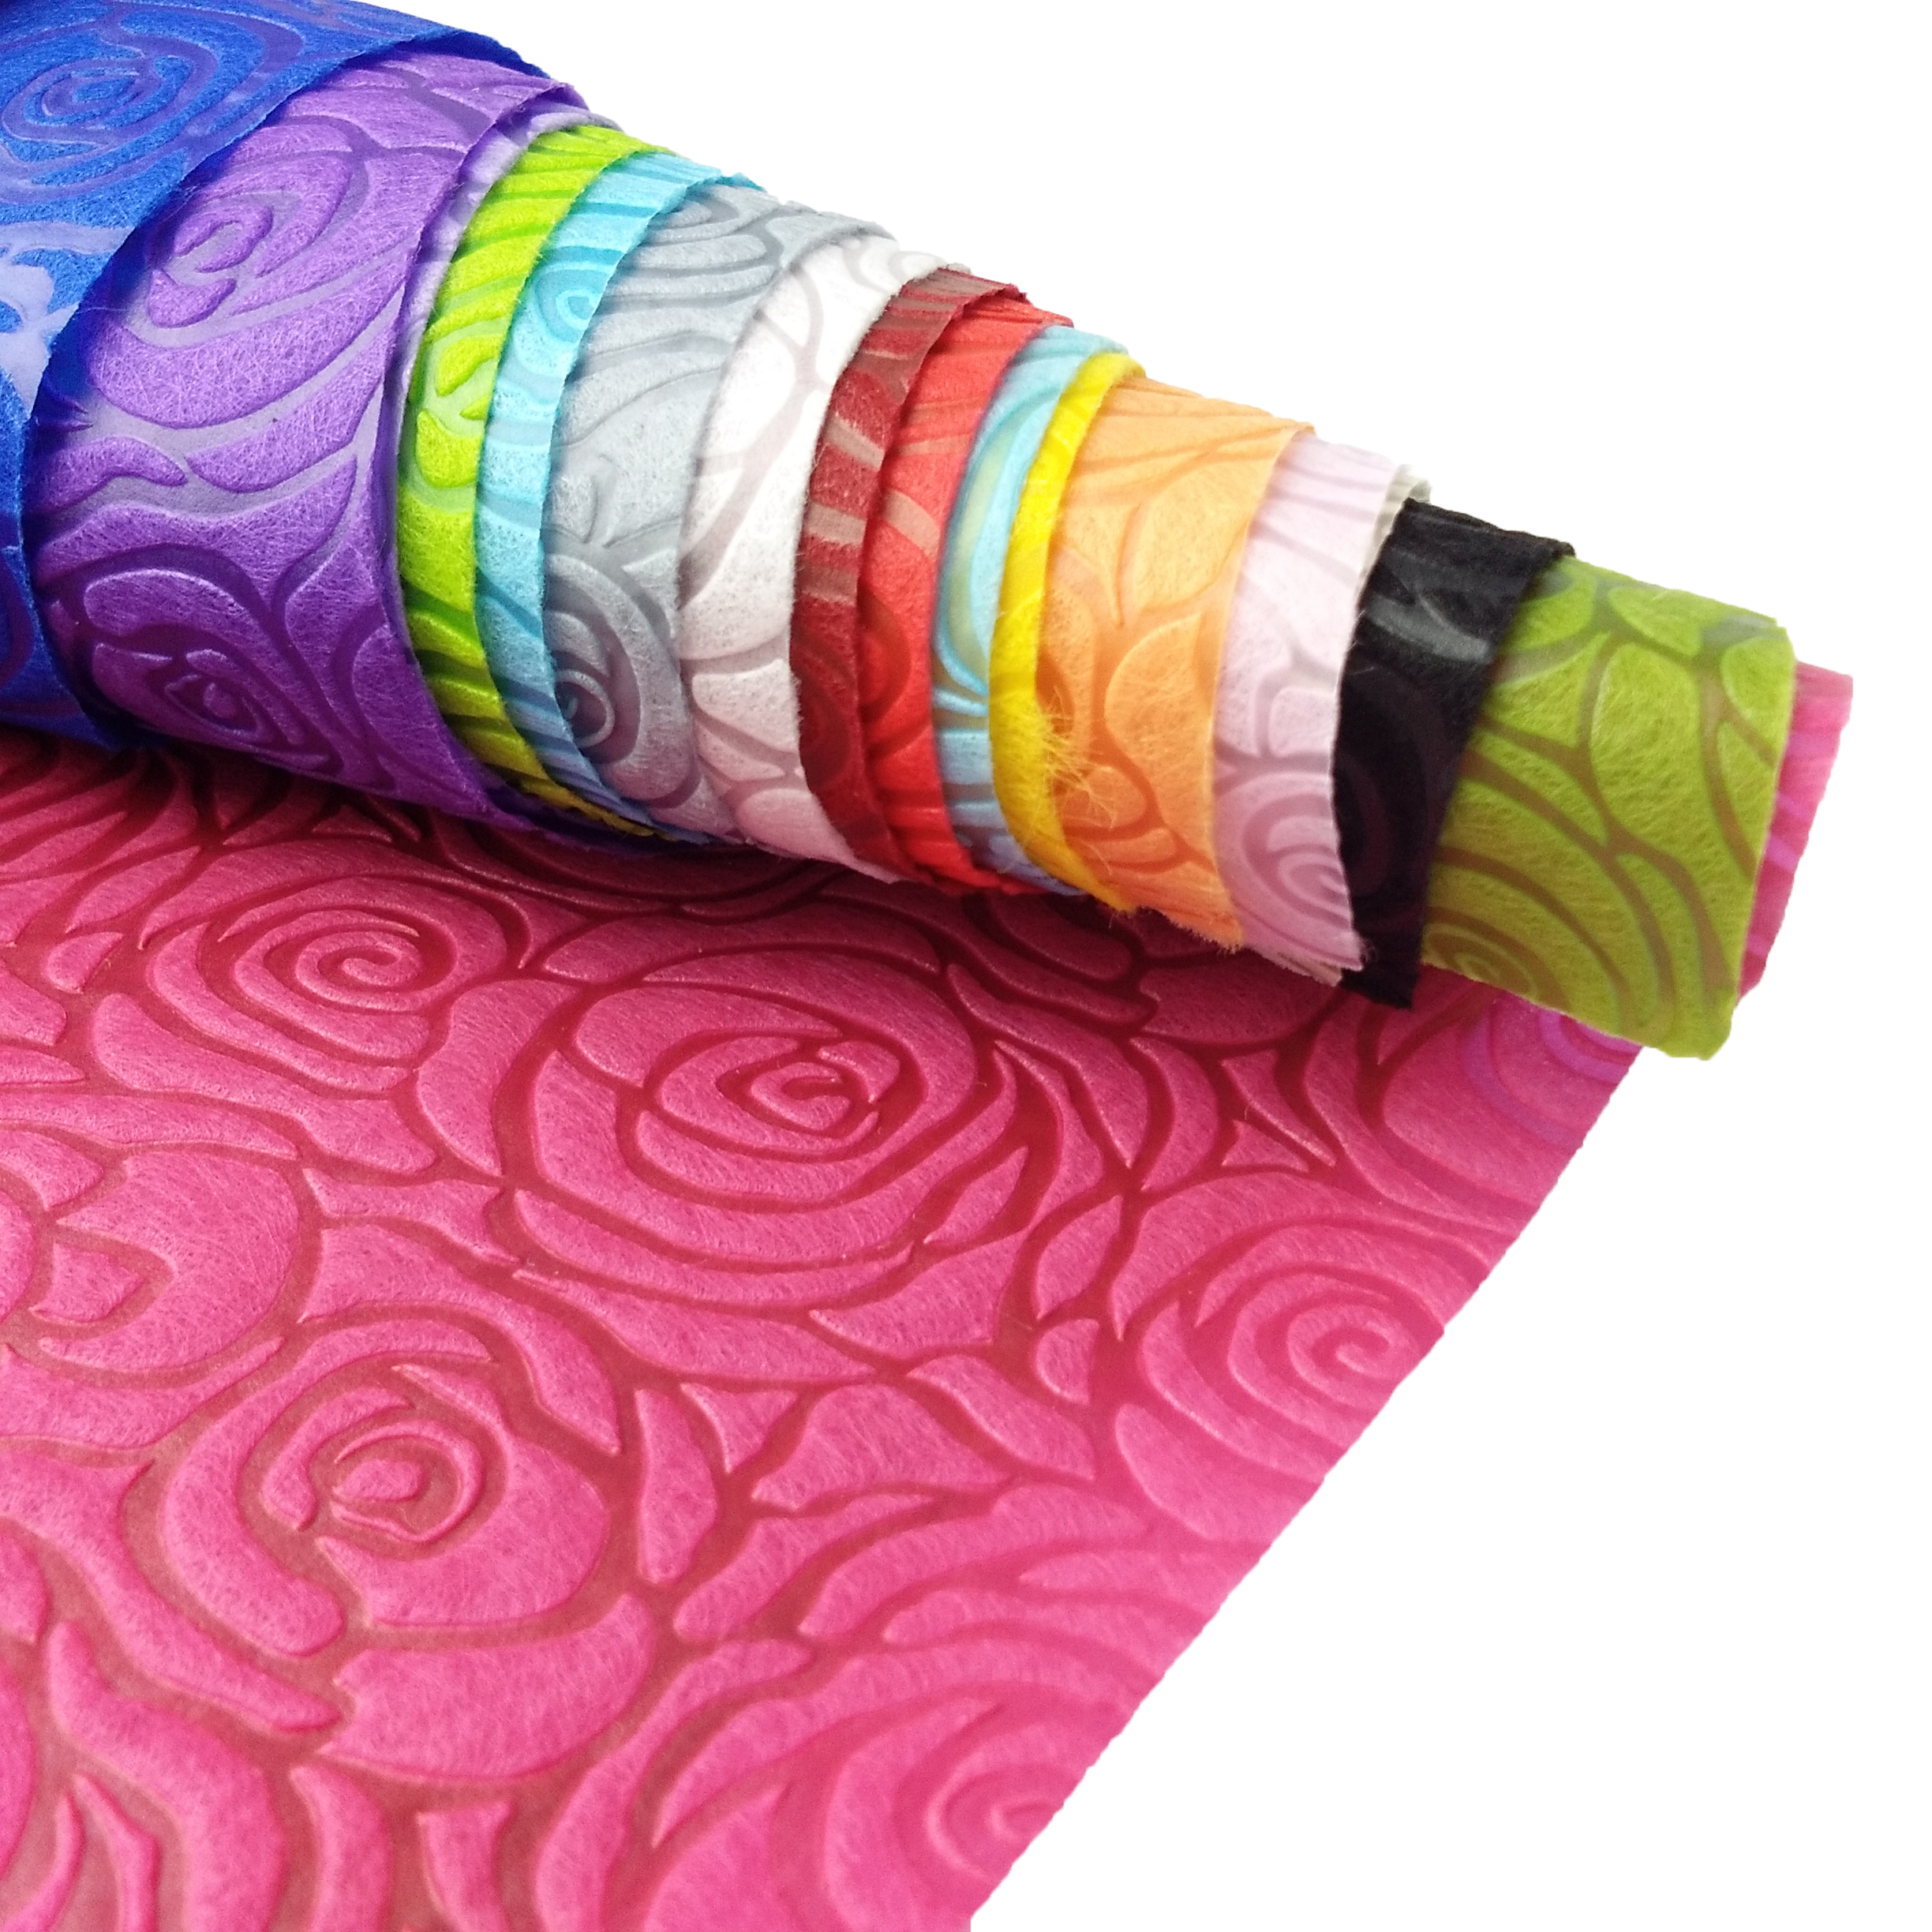 Premium wrapping paper Emboss nonwoven fabric roll for wrapping flower gifts